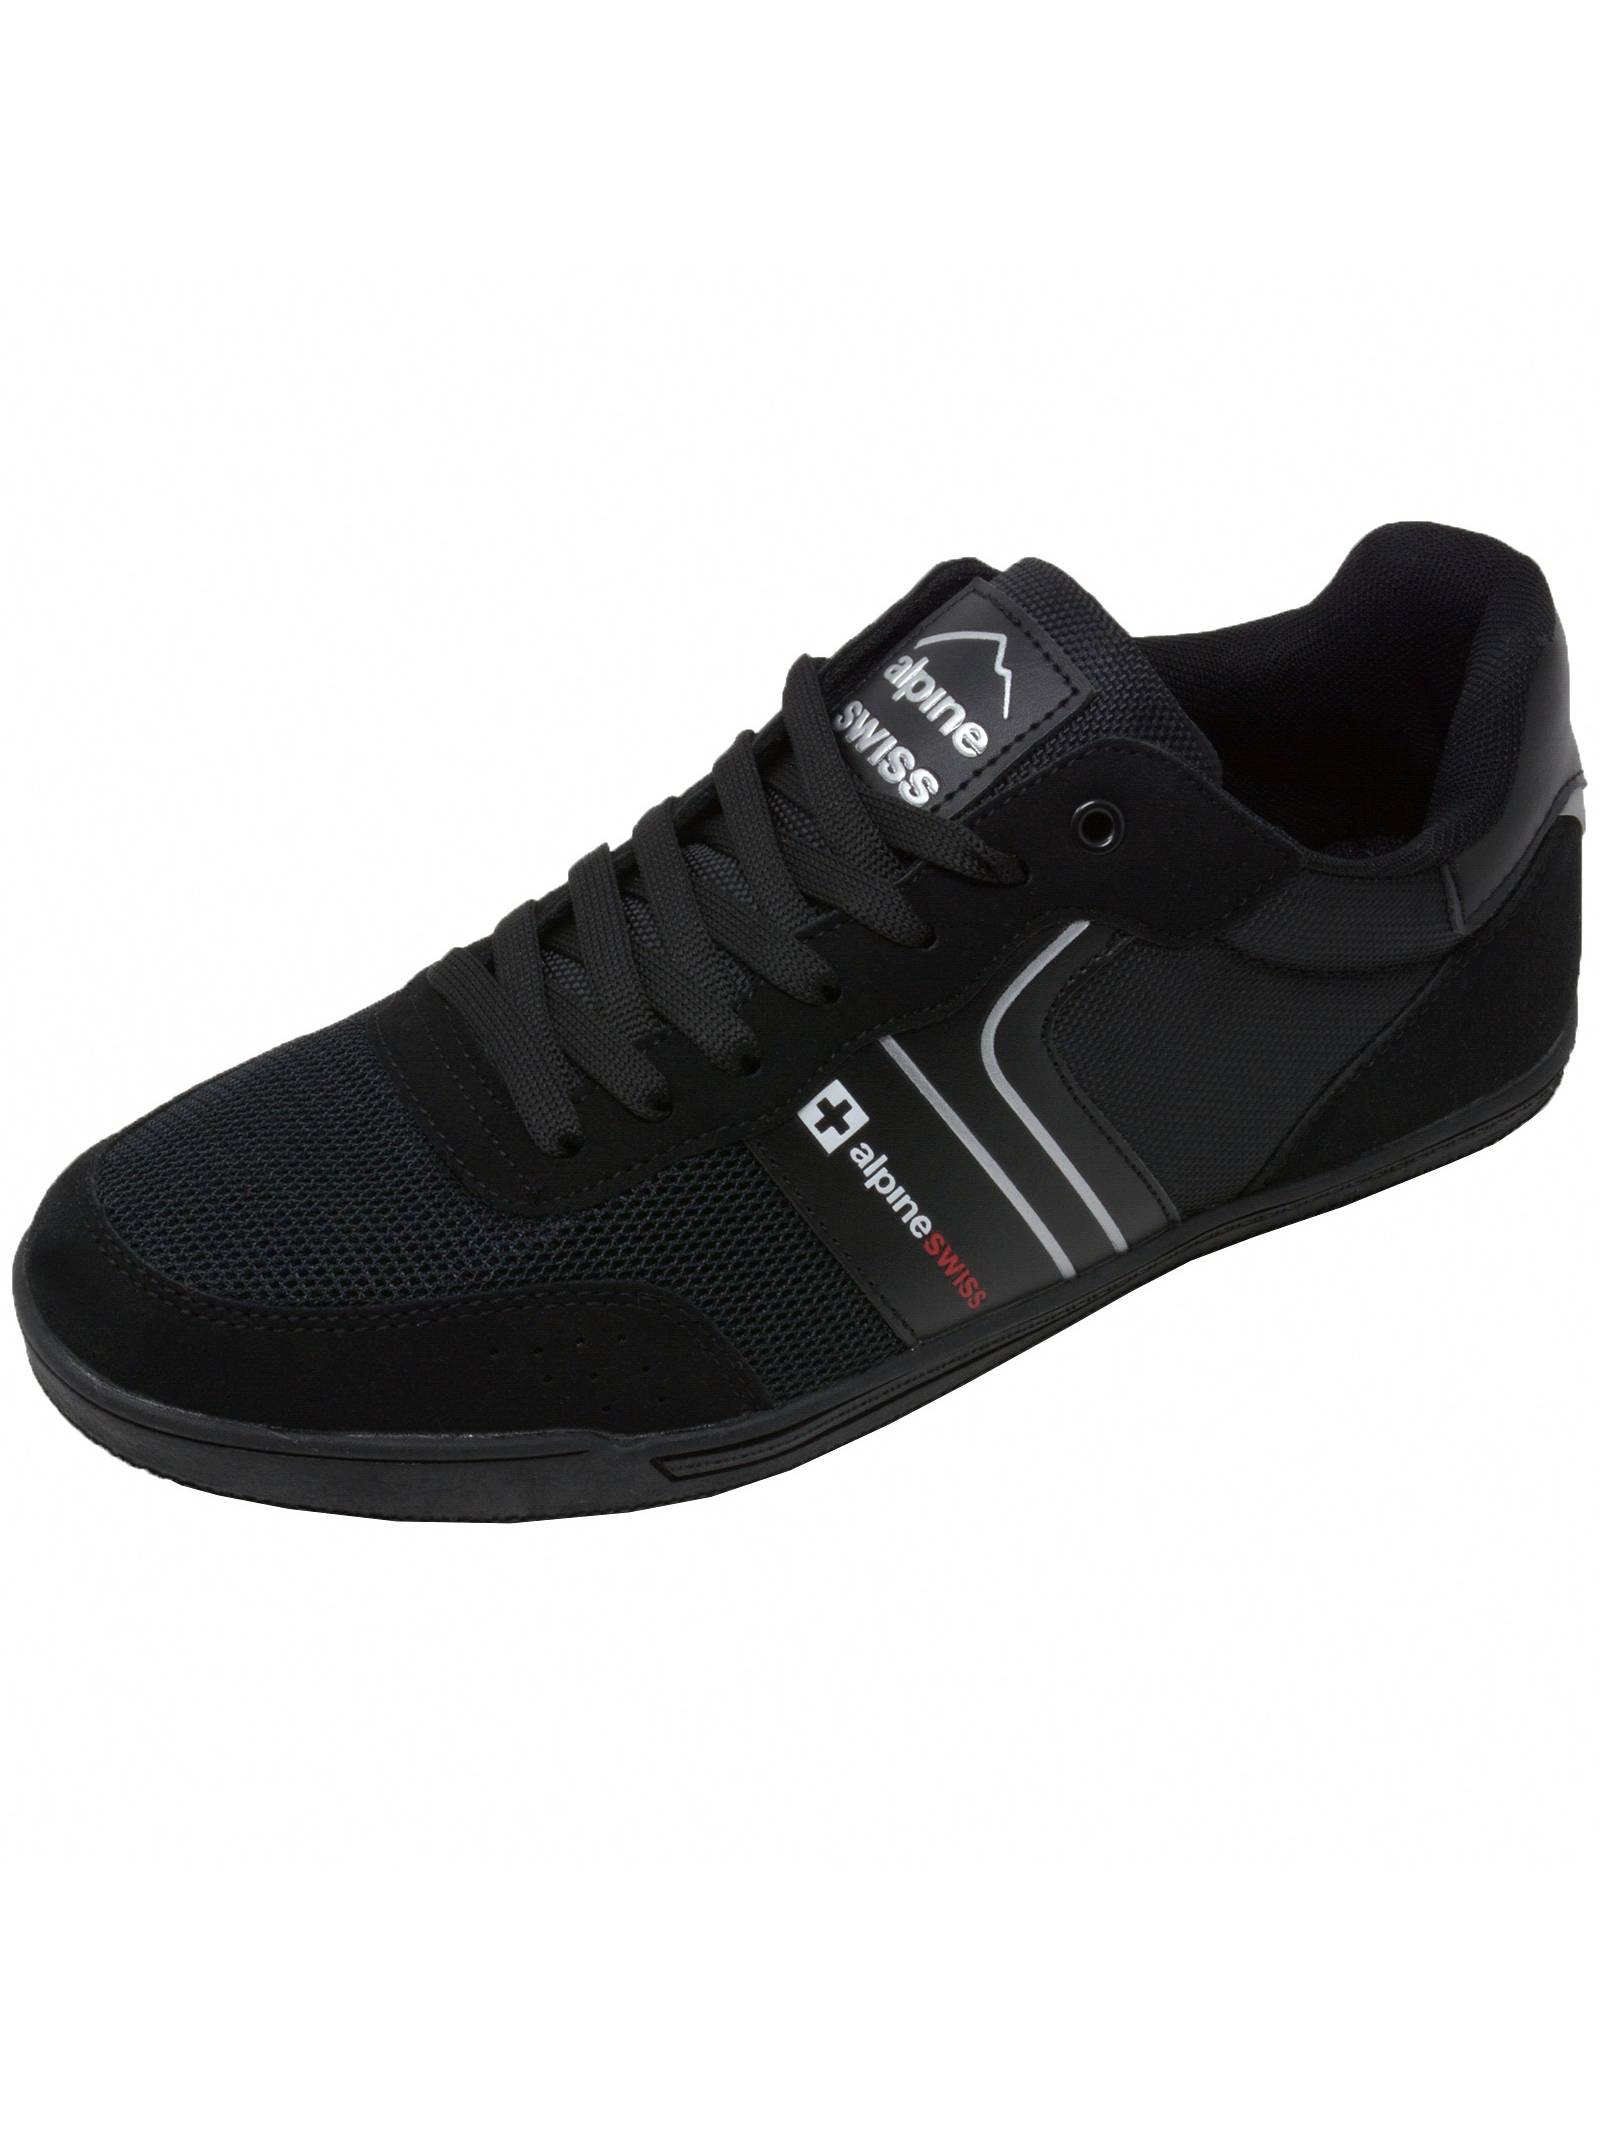 Alpine Swiss Liam Mens Fashion Sneakers Suede Trim Low Top Lace Up Tennis Shoes - image 3 of 7